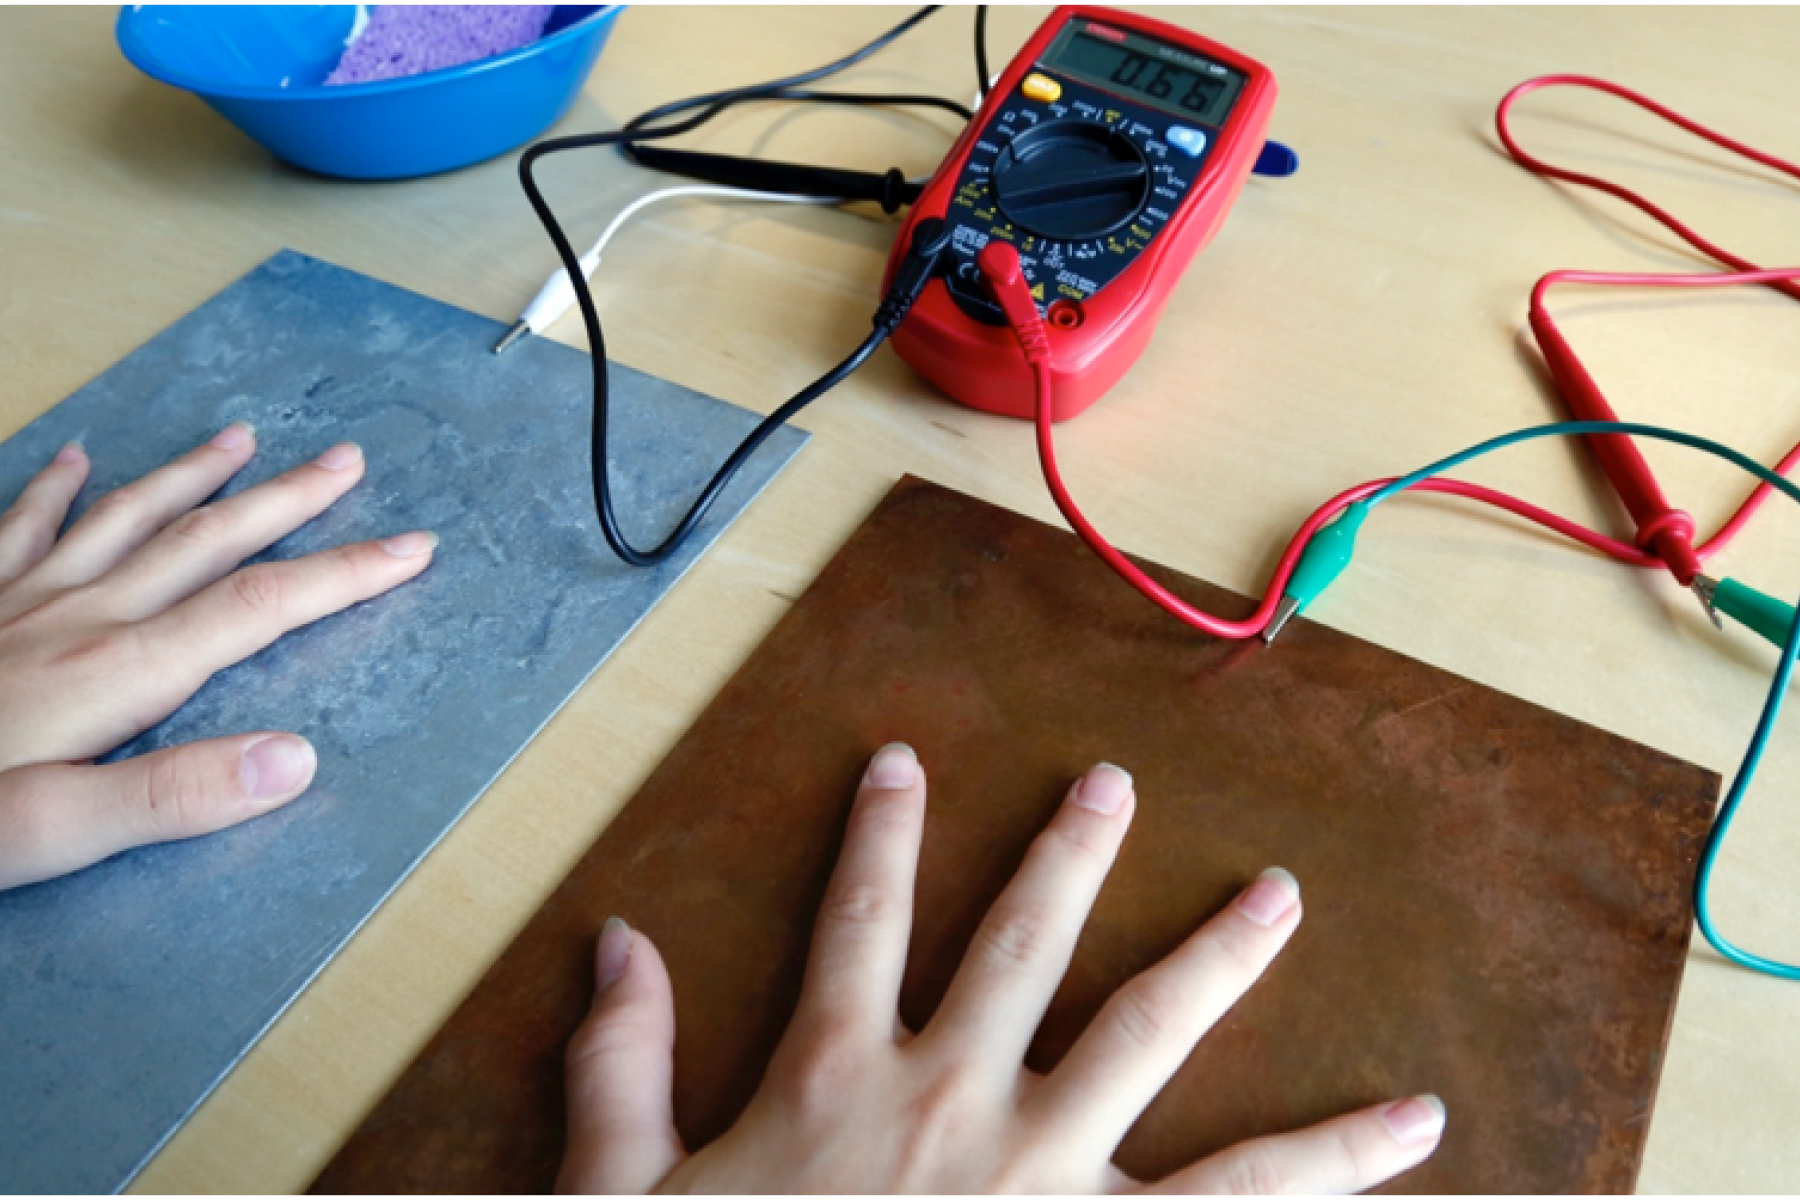 Participant's hands touching the steel and copper plates, connected to a multimeter